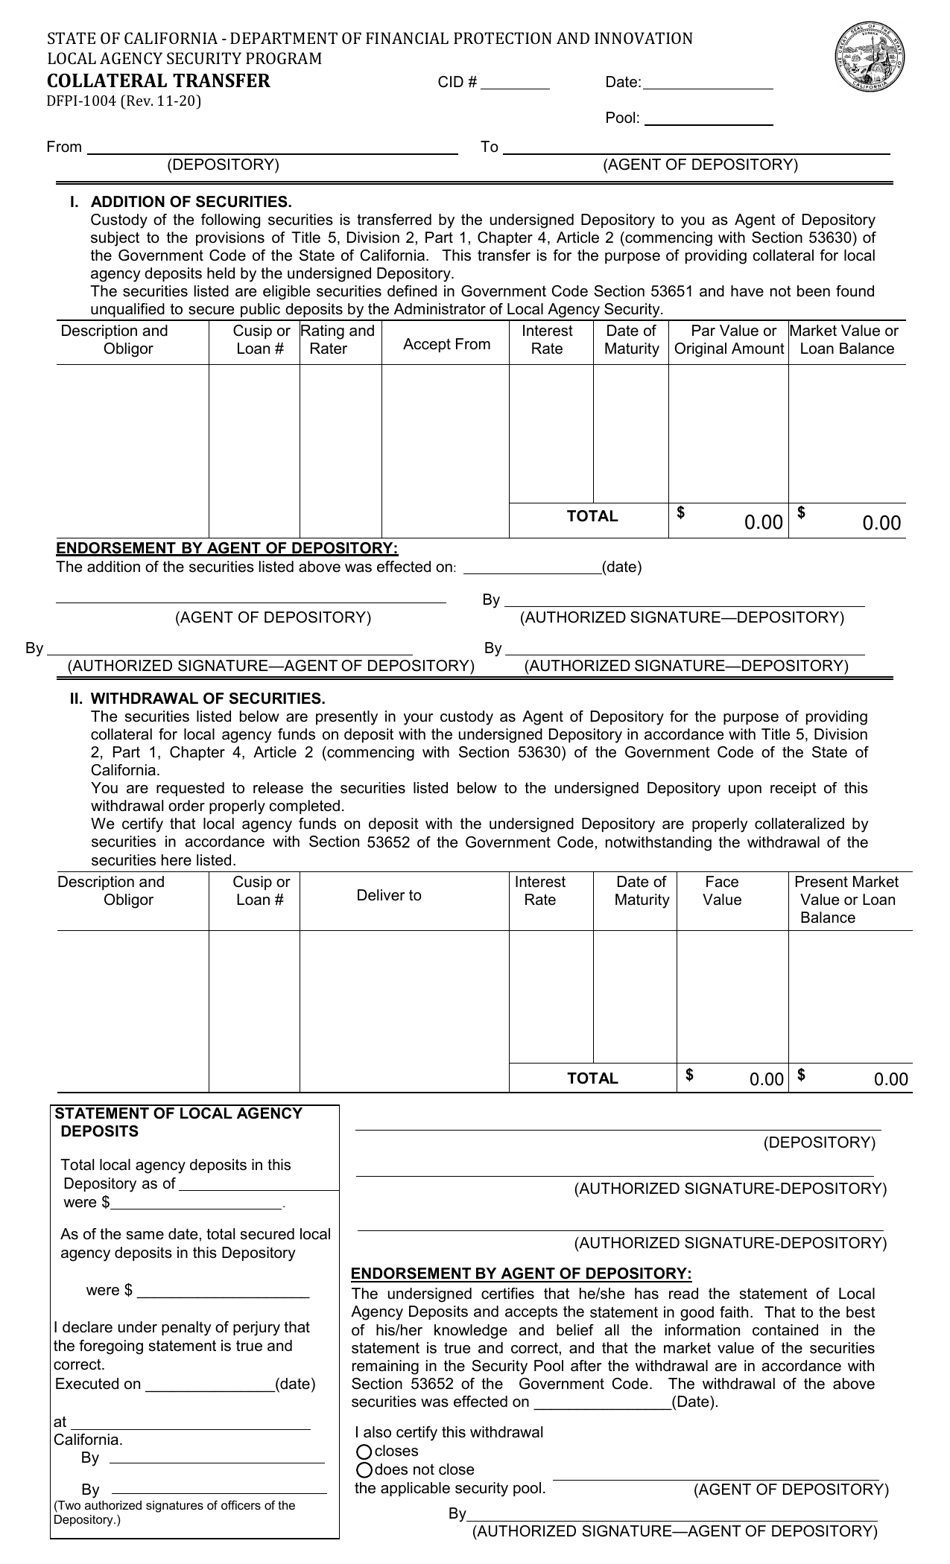 Form DFPI-1004 Local Agency Security Program Collateral Transfer - California, Page 1